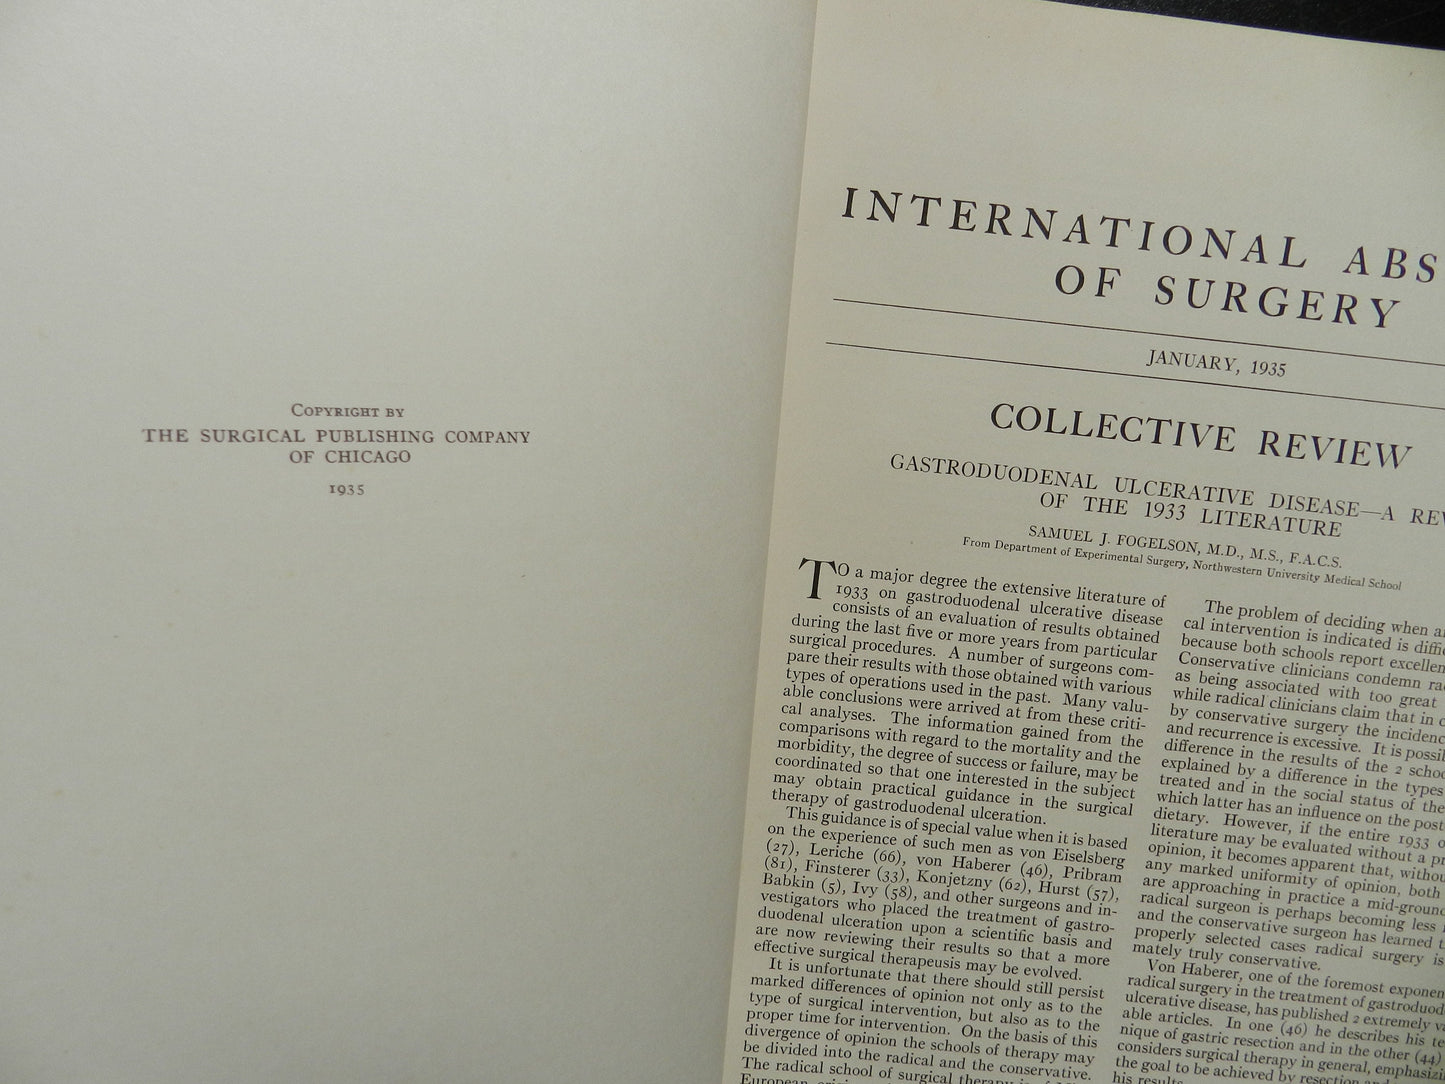 Antique Medical Book "International Abstract of Surgery" January to June, 1935